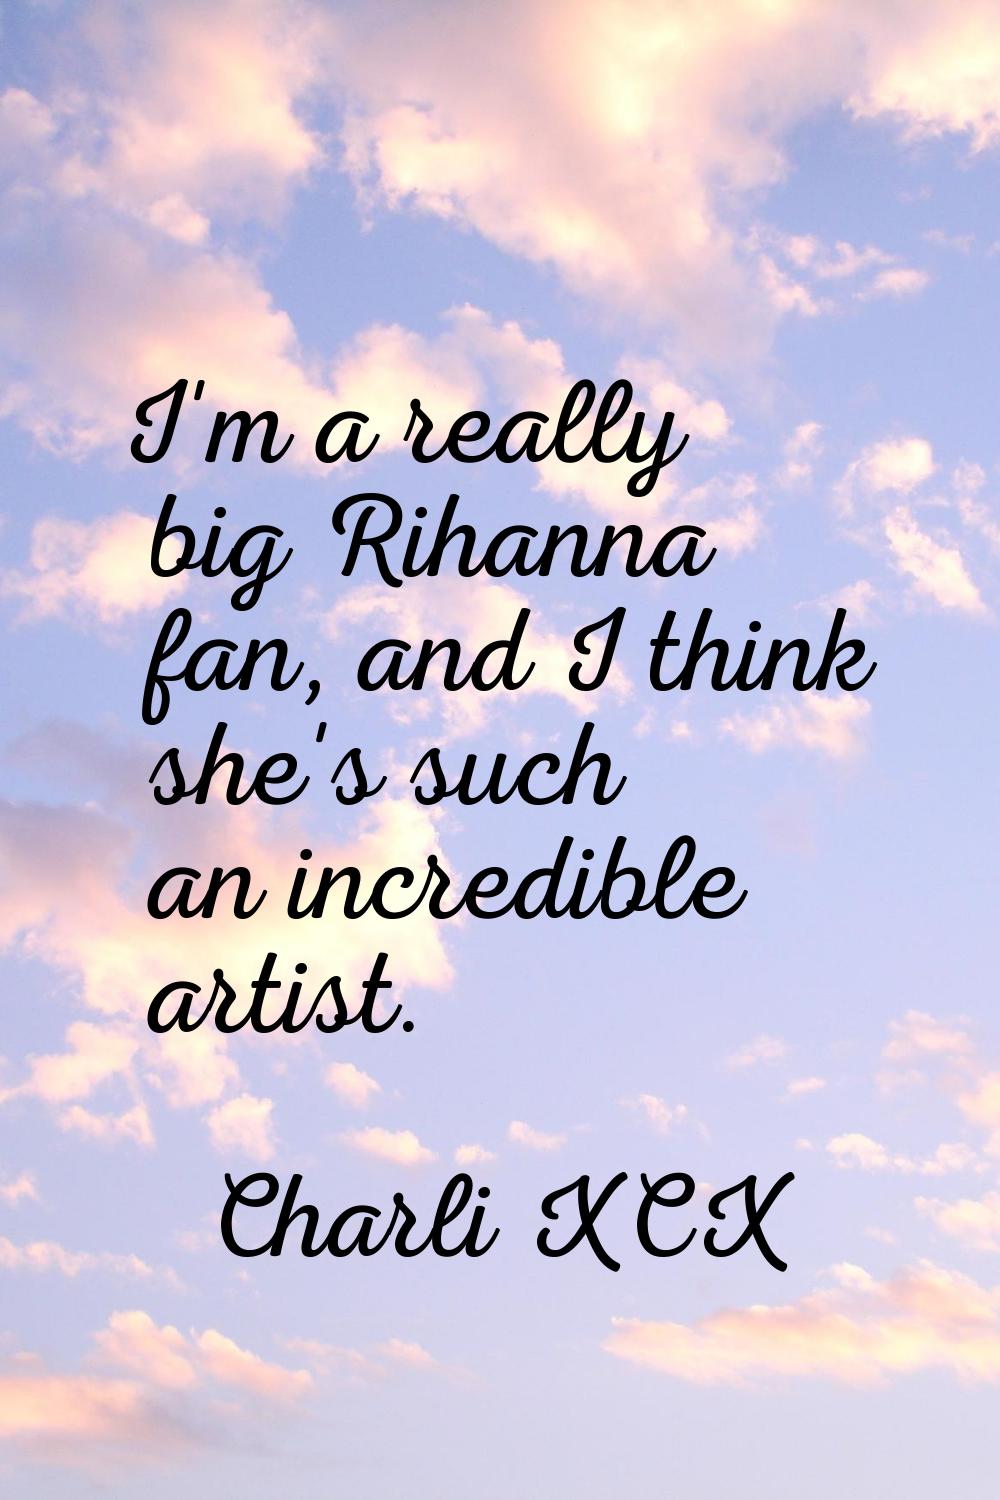 I'm a really big Rihanna fan, and I think she's such an incredible artist.